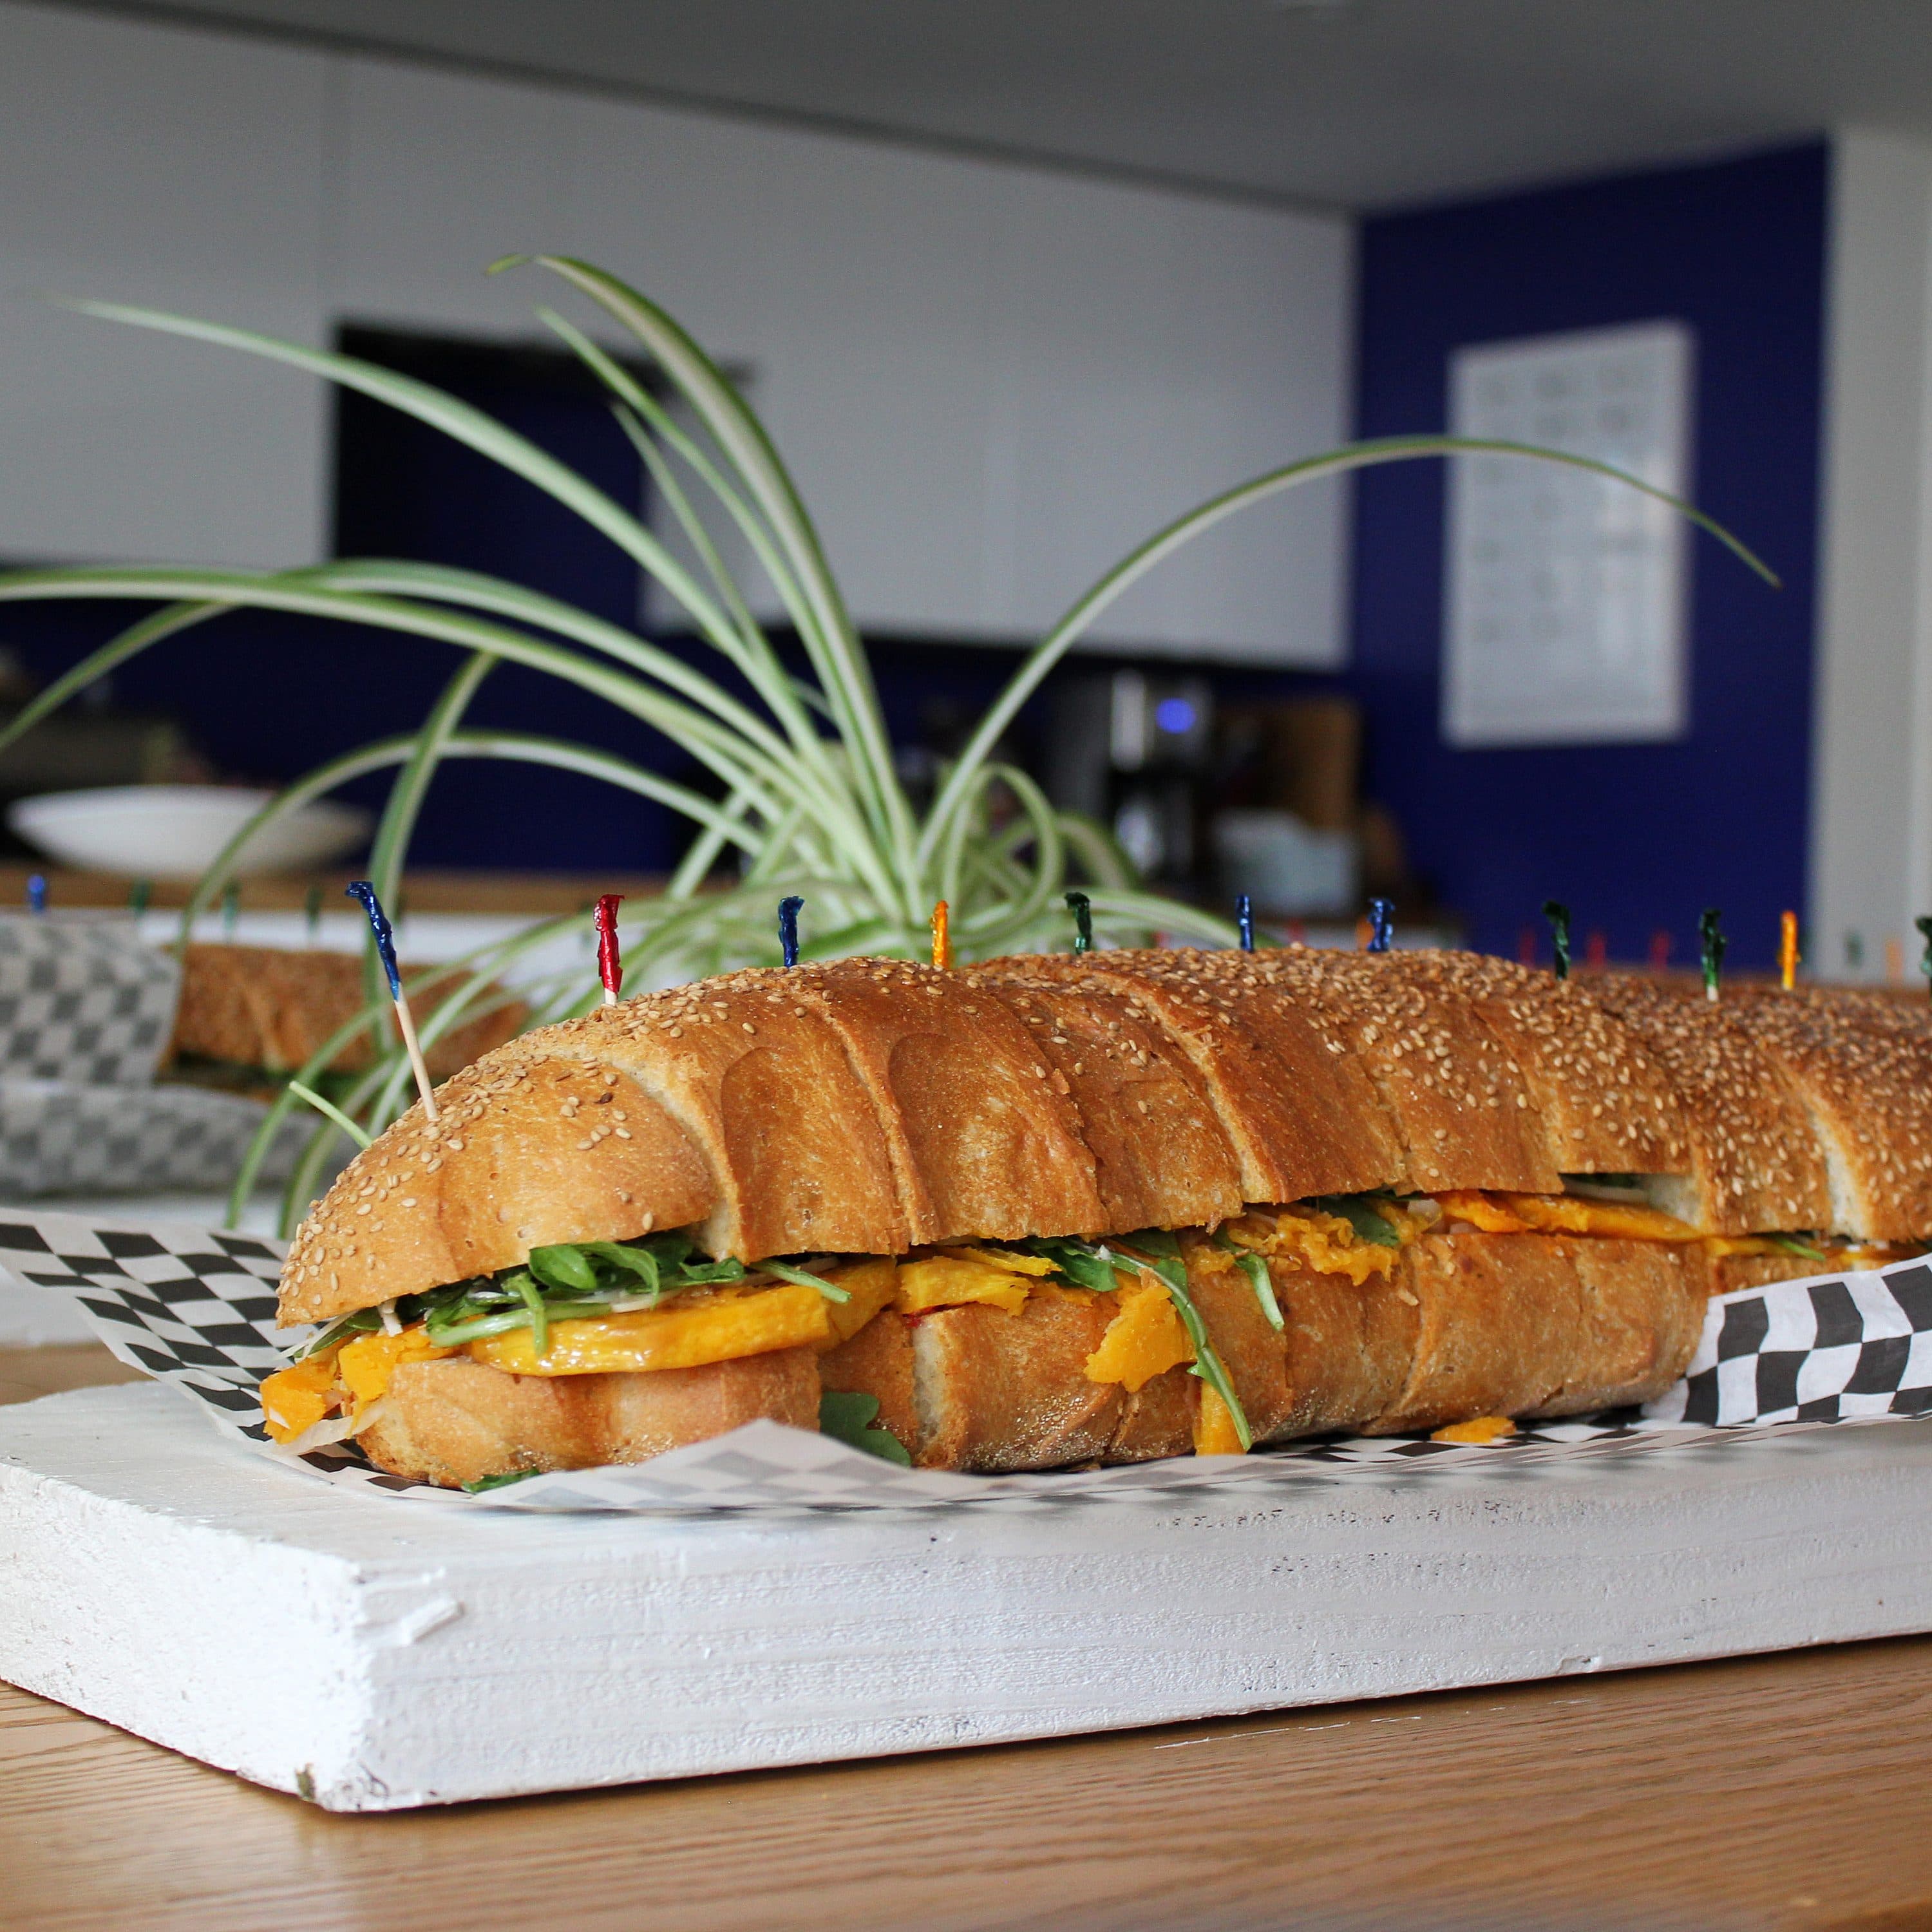 A long sandwich with sesame seed topped bread, filled with various ingredients including greens and cheese, is placed on a wooden tray lined with checkered paper. The background features a modern kitchen with a plant in focus.